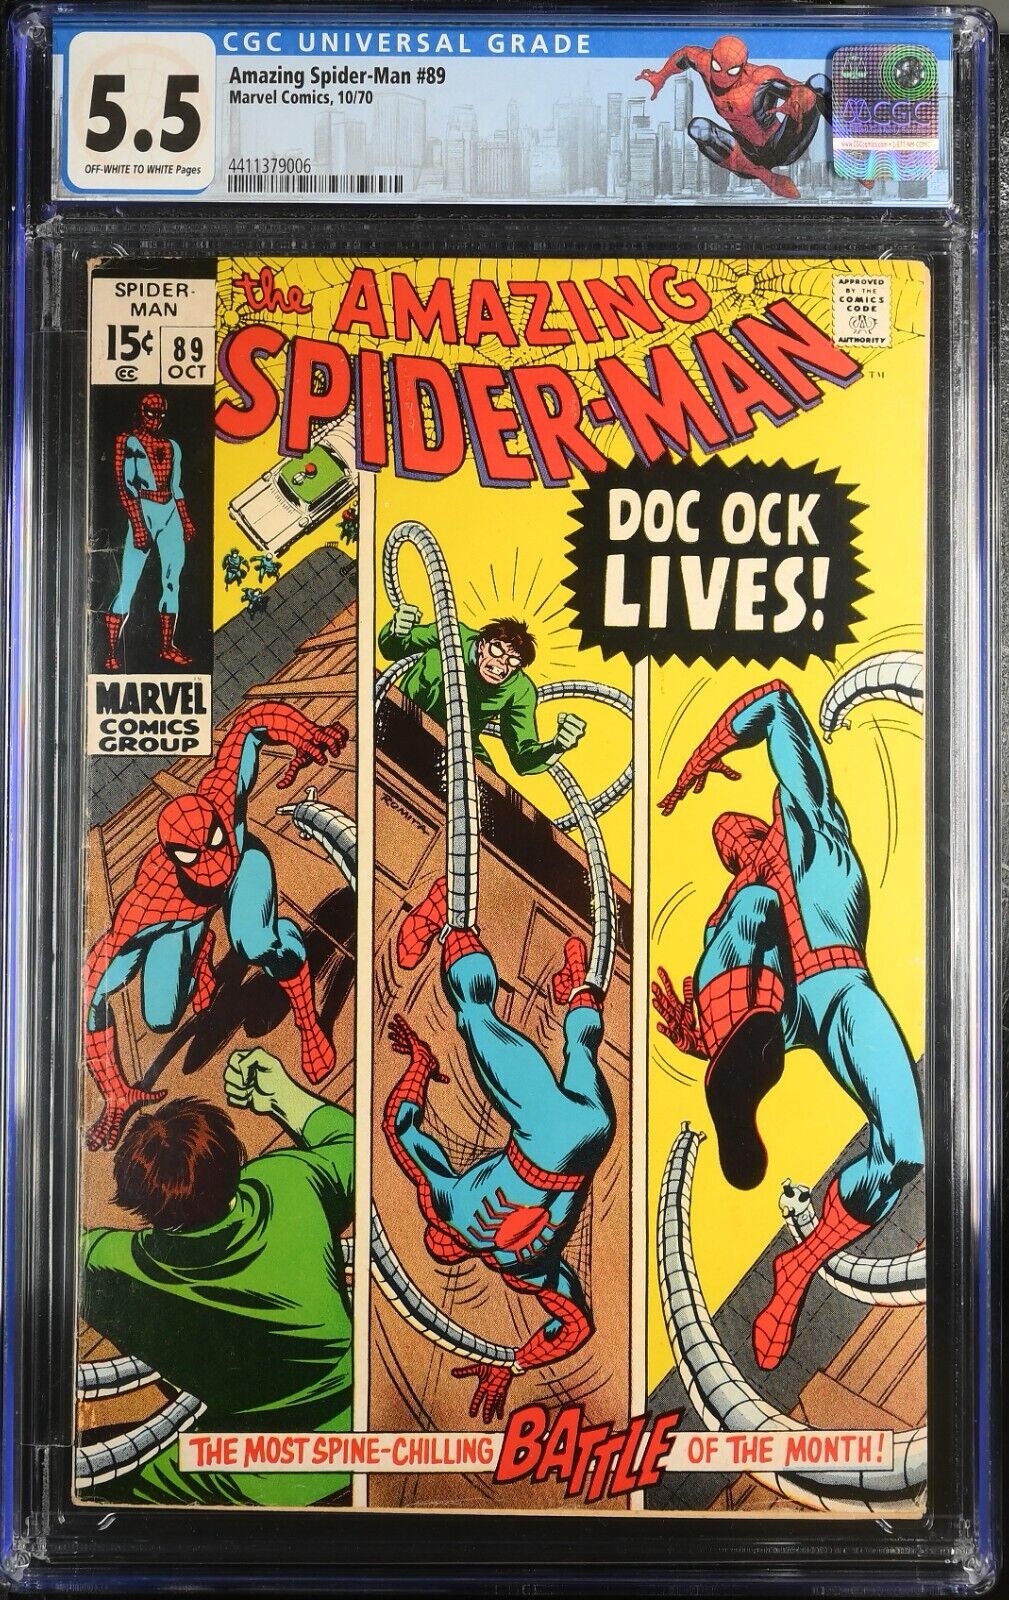 AMAZING SPIDER-MAN #89 CGC 5.5 1970 MARVEL OW/WHITE PAGES STAN LEE DOC OCK LIVES